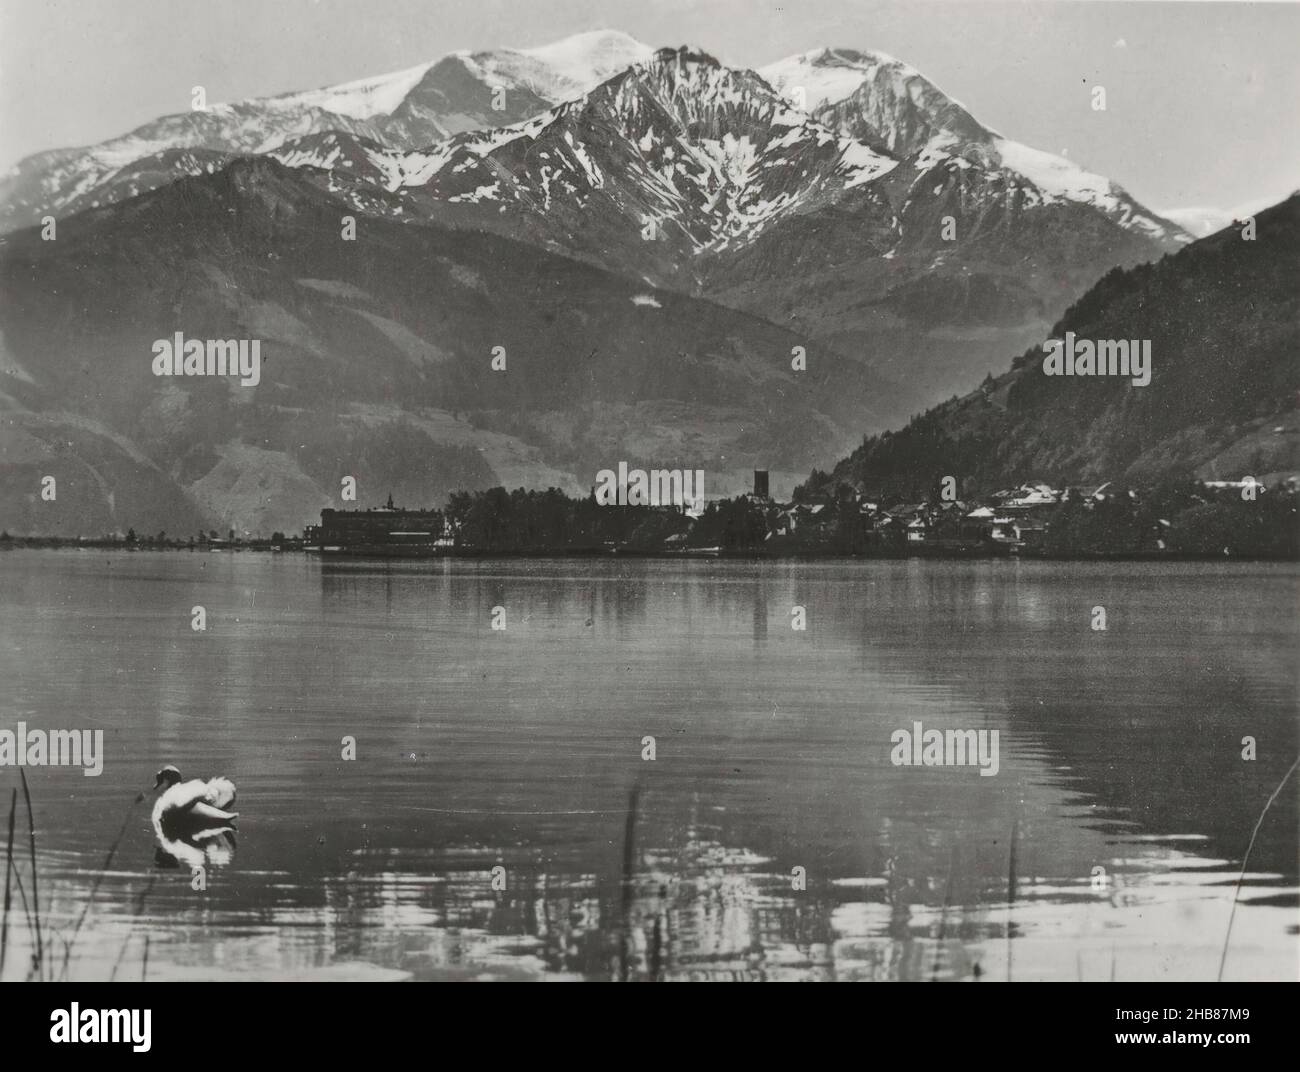 View of Zell am See, the Zeller See and the Hoher Tenn, anonymous, publisher: C.J.S. (mentioned on object), Zell am See, publisher: Salzburg, c. 1950 - c. 1960, photographic support, gelatin silver print, height 62 mm × width 82 mm Stock Photo